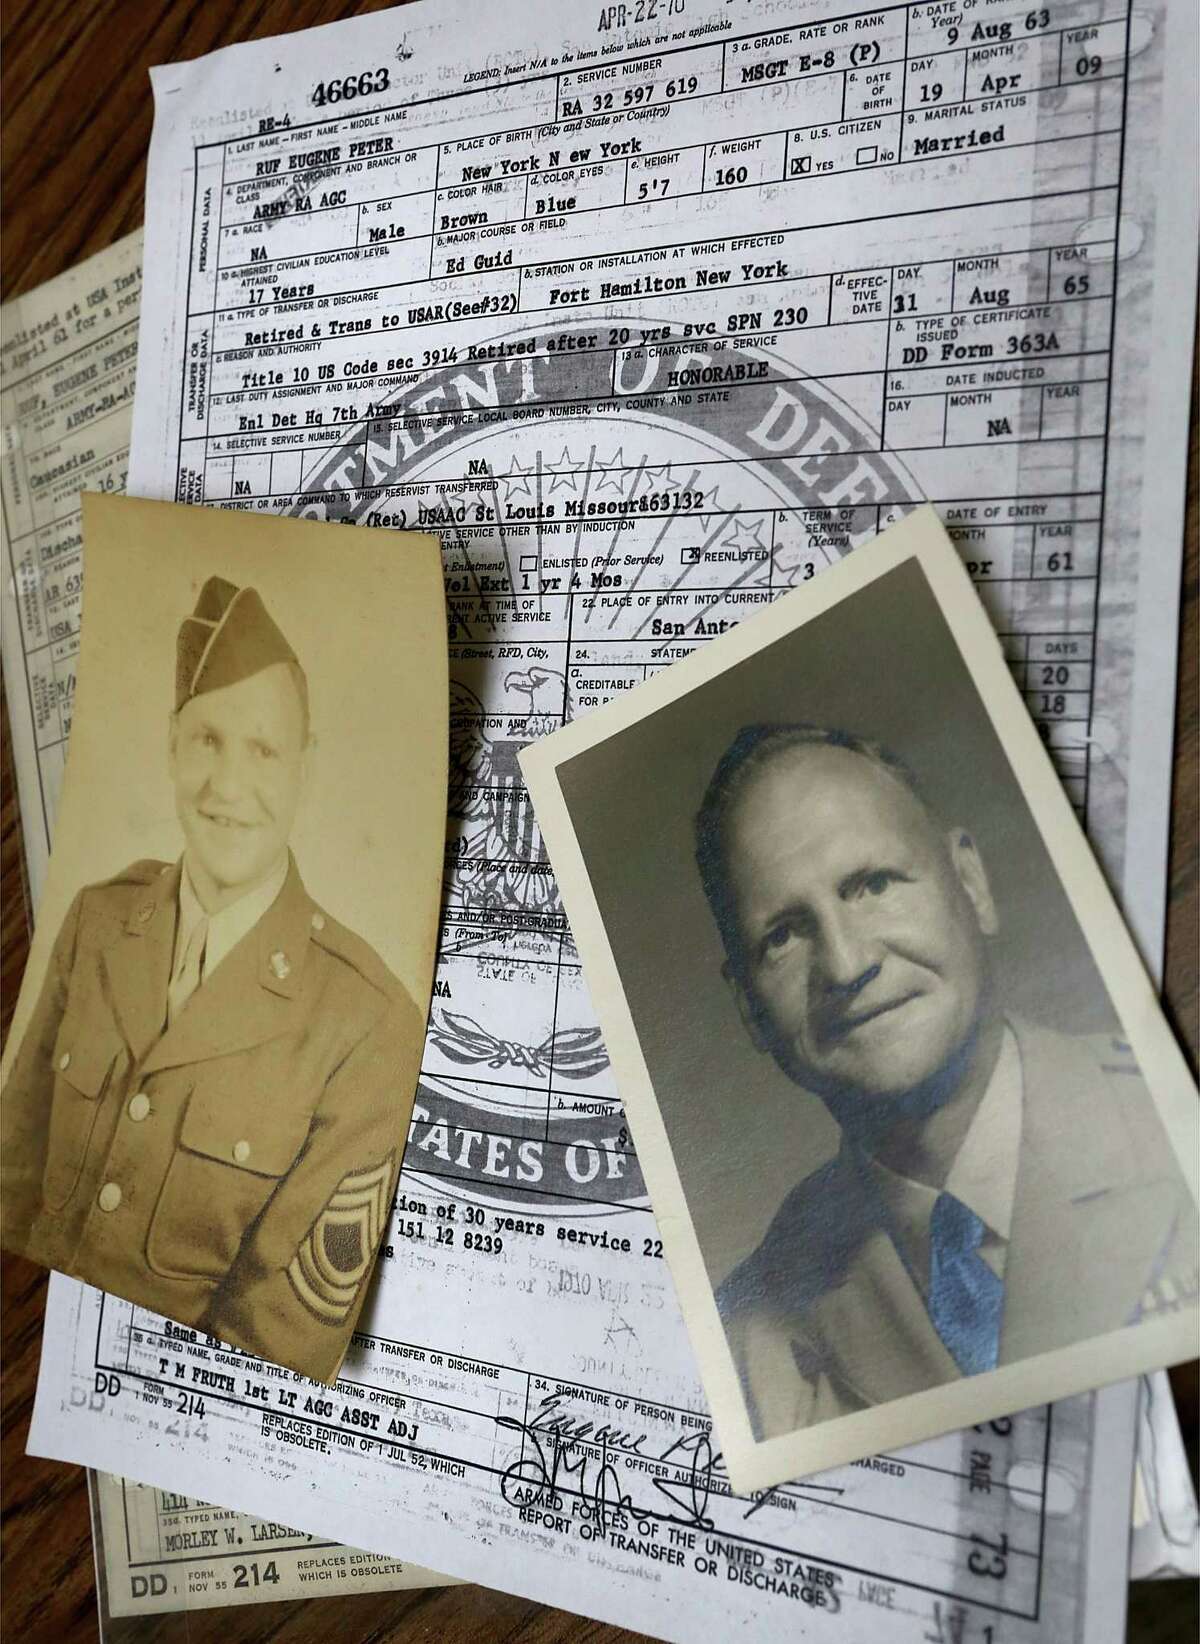 LEFT: Old photos and military discharge papers of Eugene Ruf, a veteran of World War II, who celebrated his 108th birthday on Wednesday, April 19, 2017, at Brookdale Senior Living Solutions with family and friends.